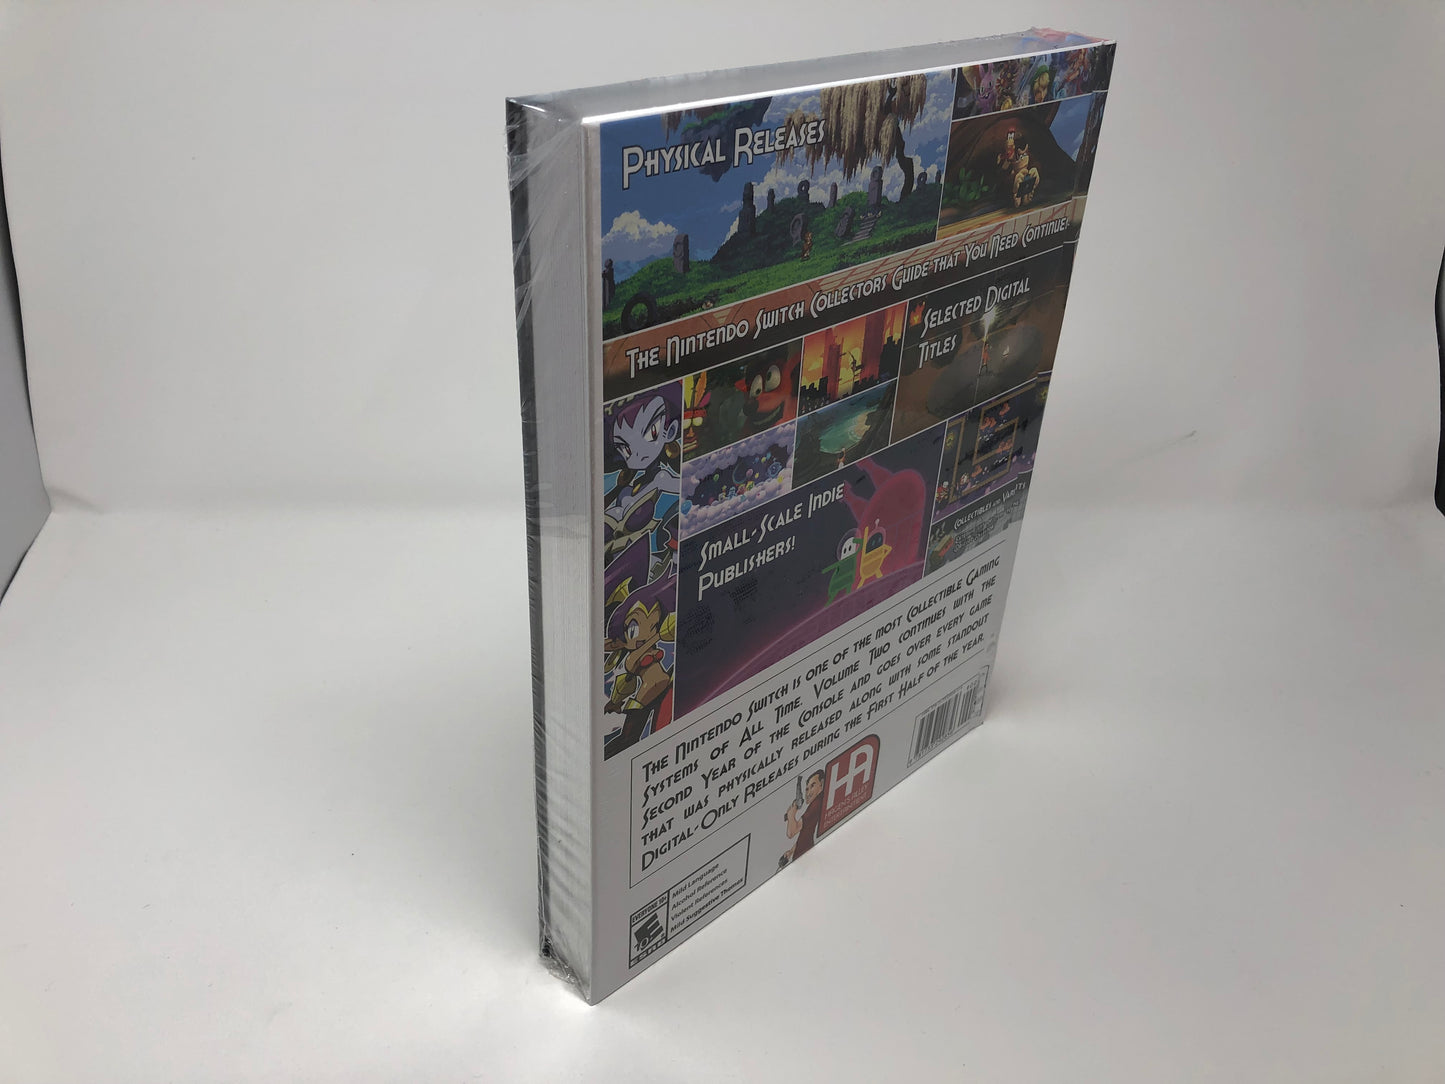 The Switch Collector: Year Two (Part One) - Hardcover Book